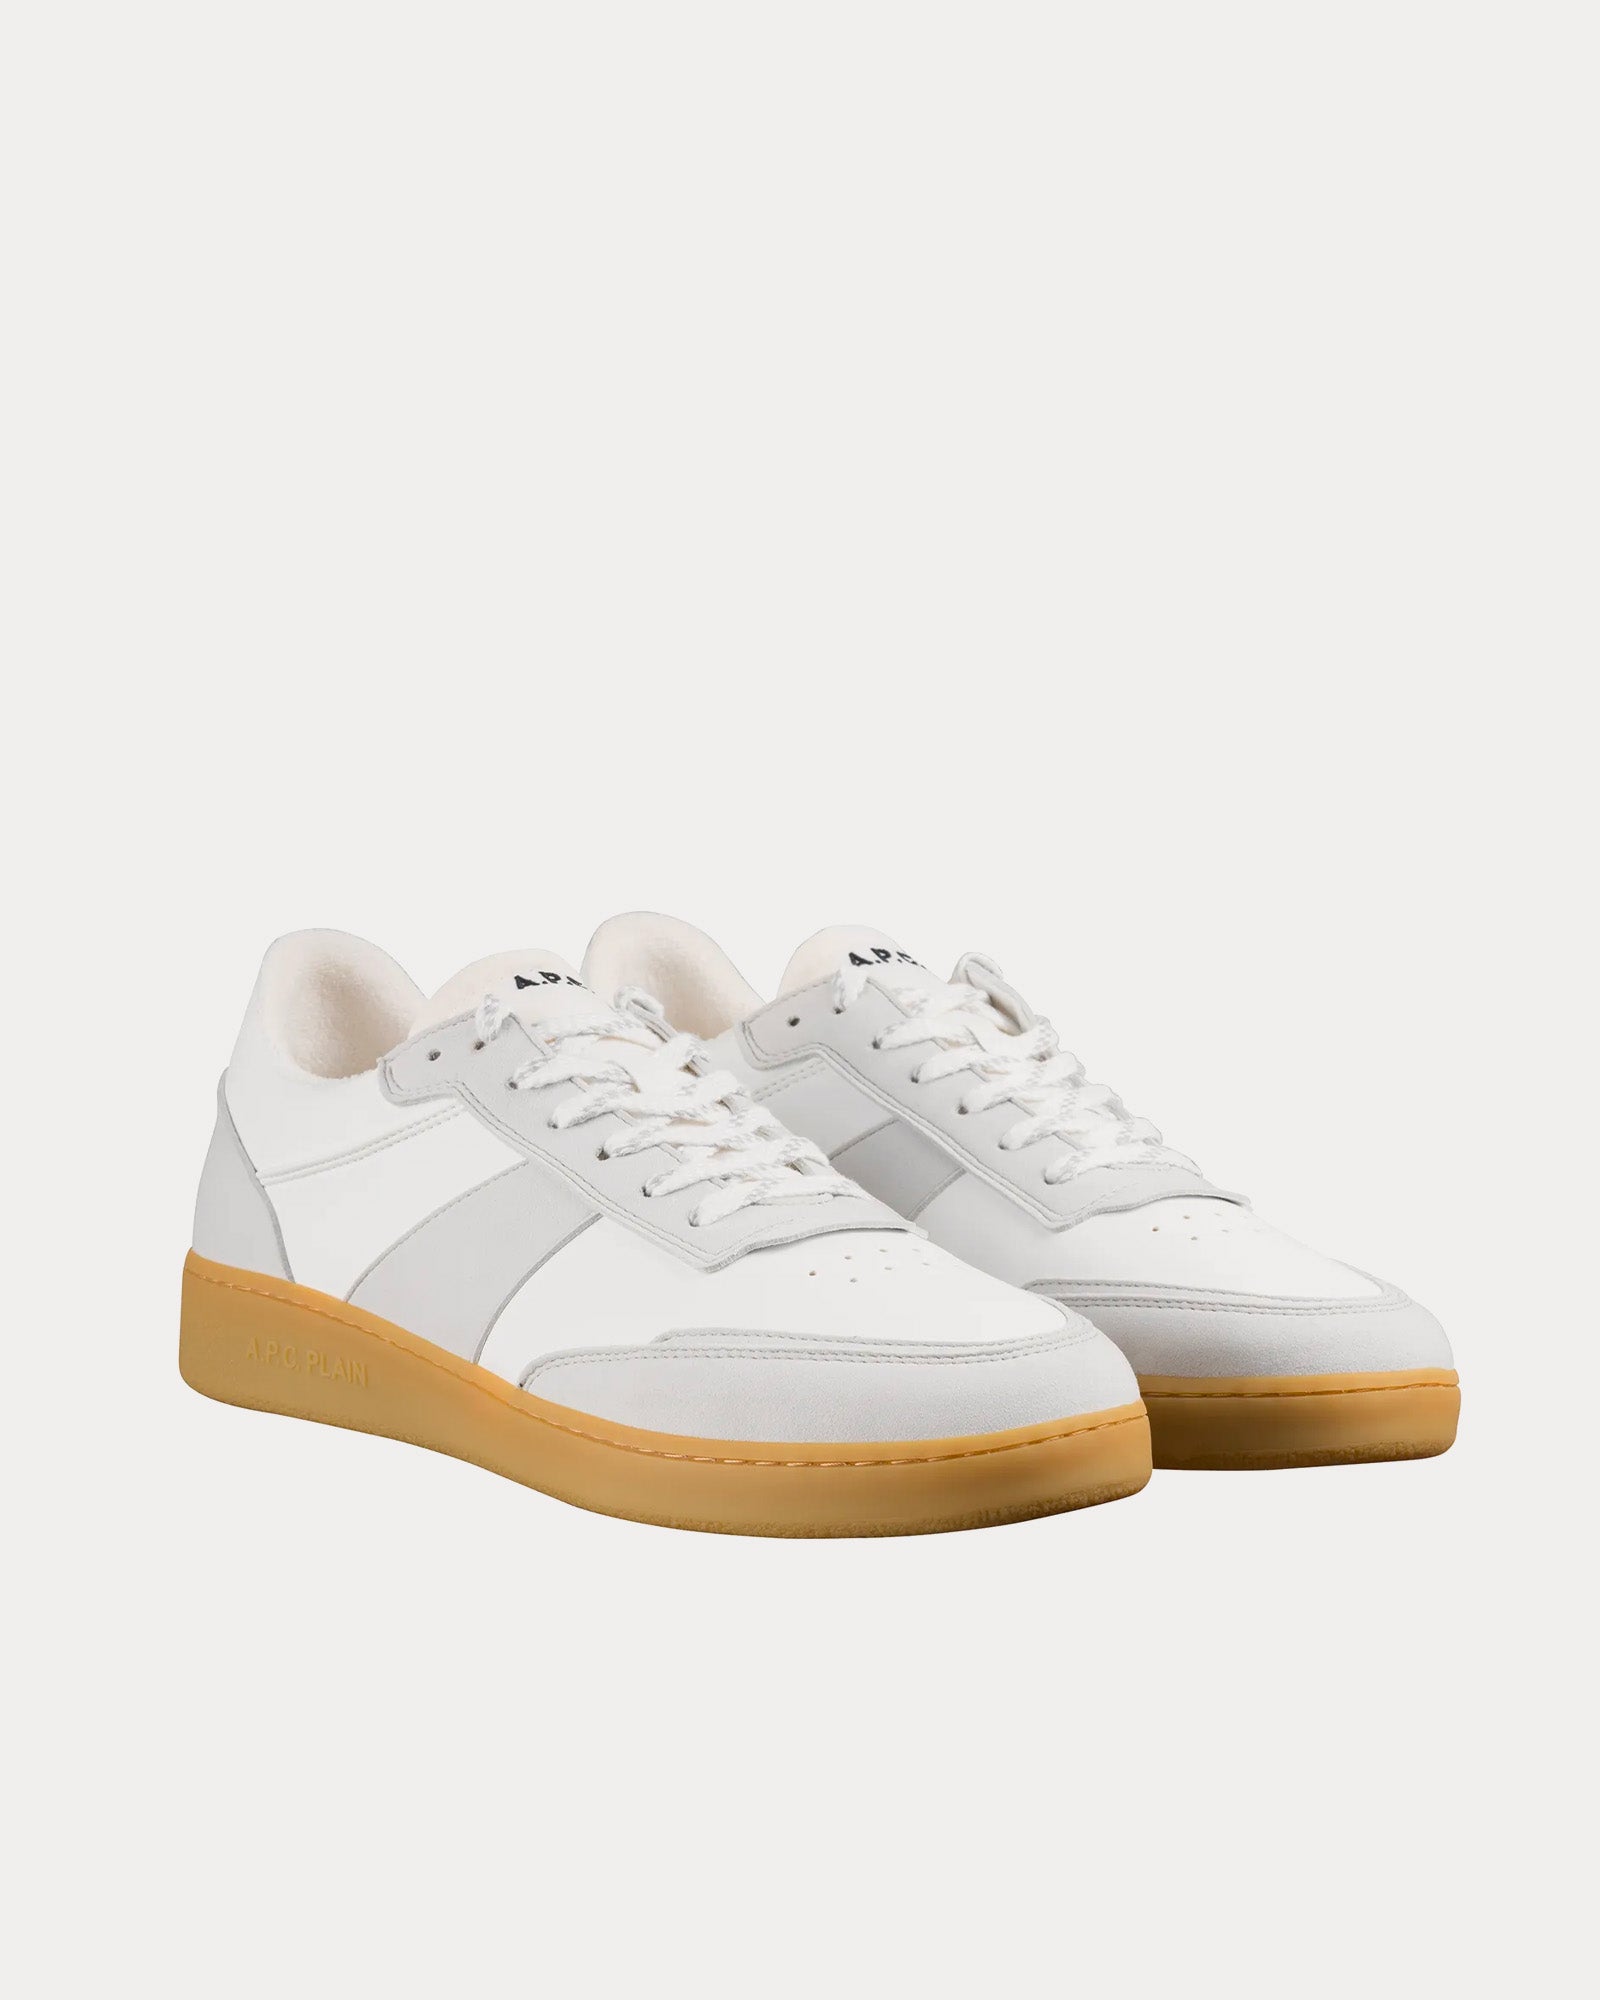 A.P.C. - Plain White / Natural Low Top Sneakers